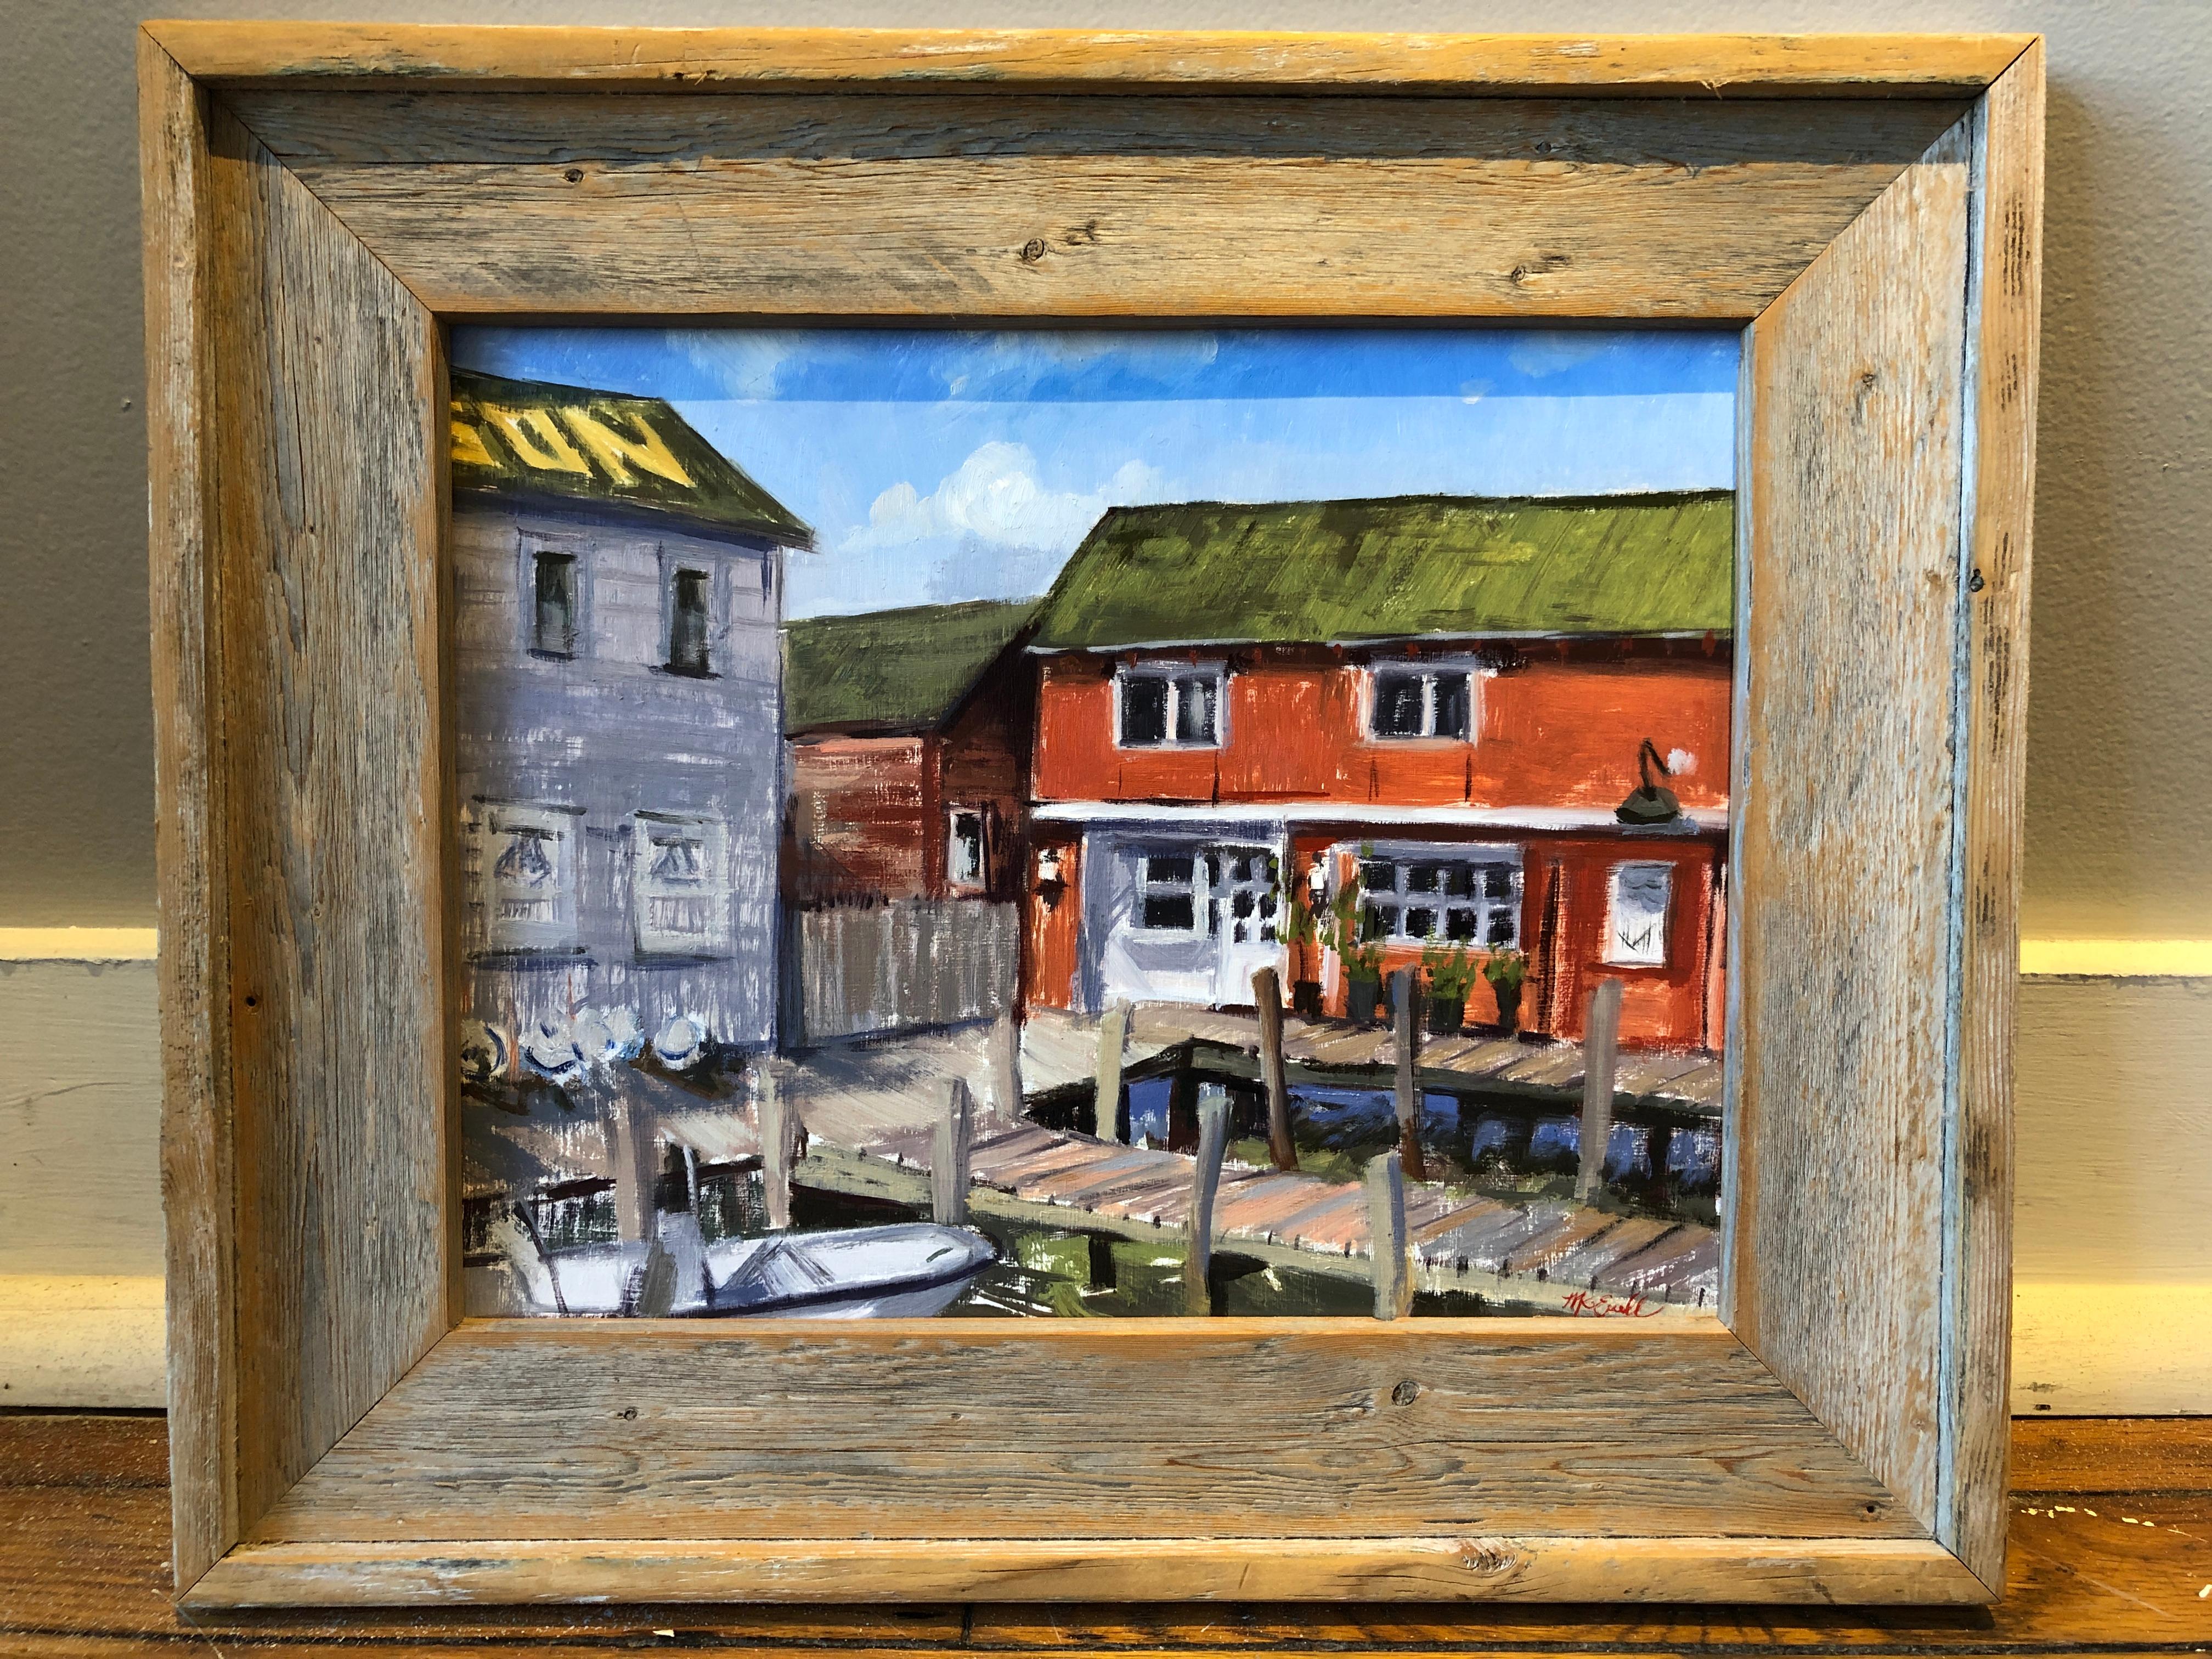 The Old Scrimshaw, Greenport - Painting by Megan Euell